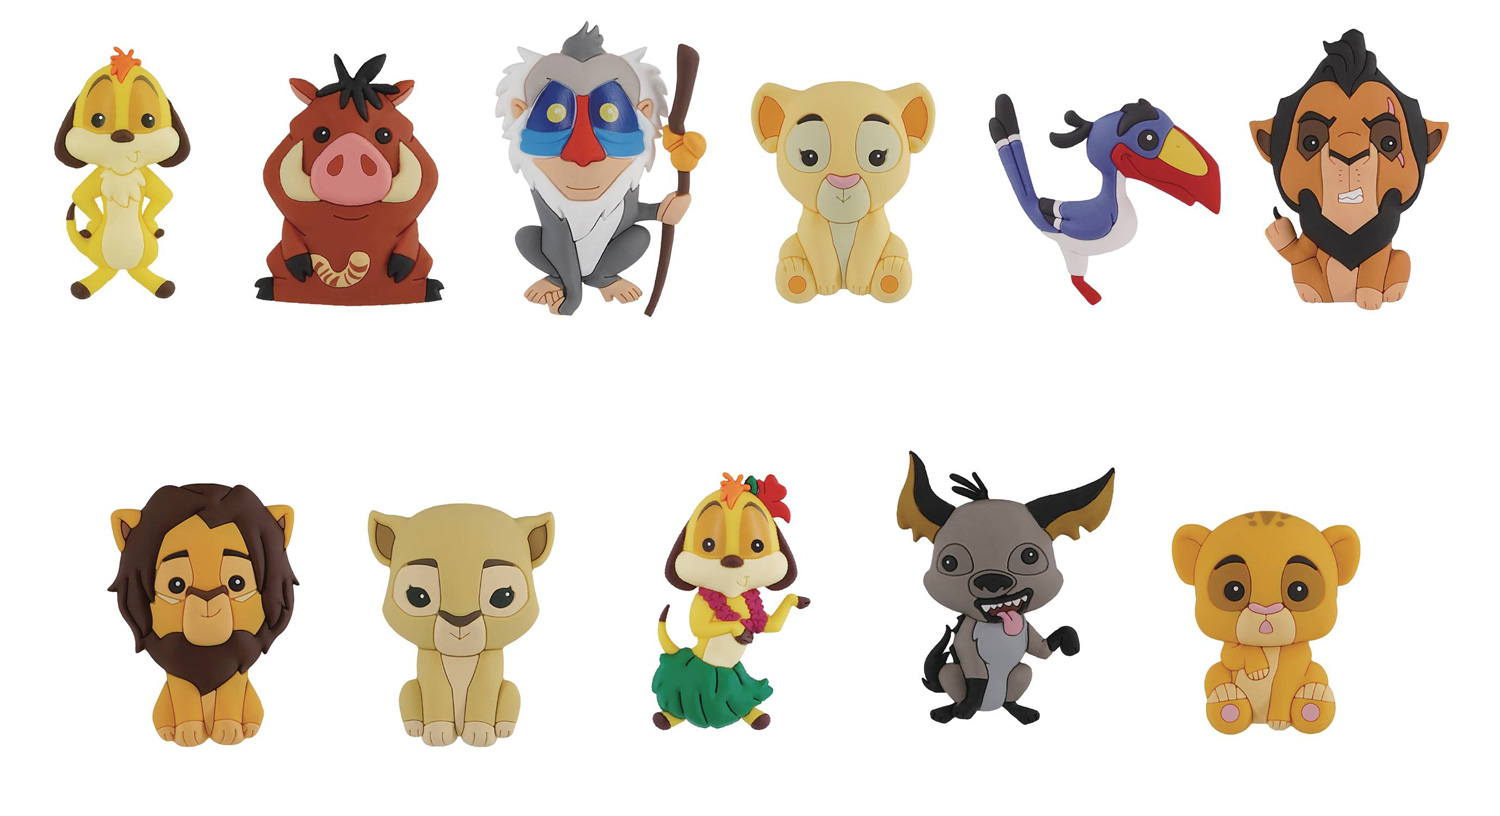 Image: Disney Series23 Lion King Figural Keyring: 24-Piece Blind Mystery Box Display  - Monogram Products